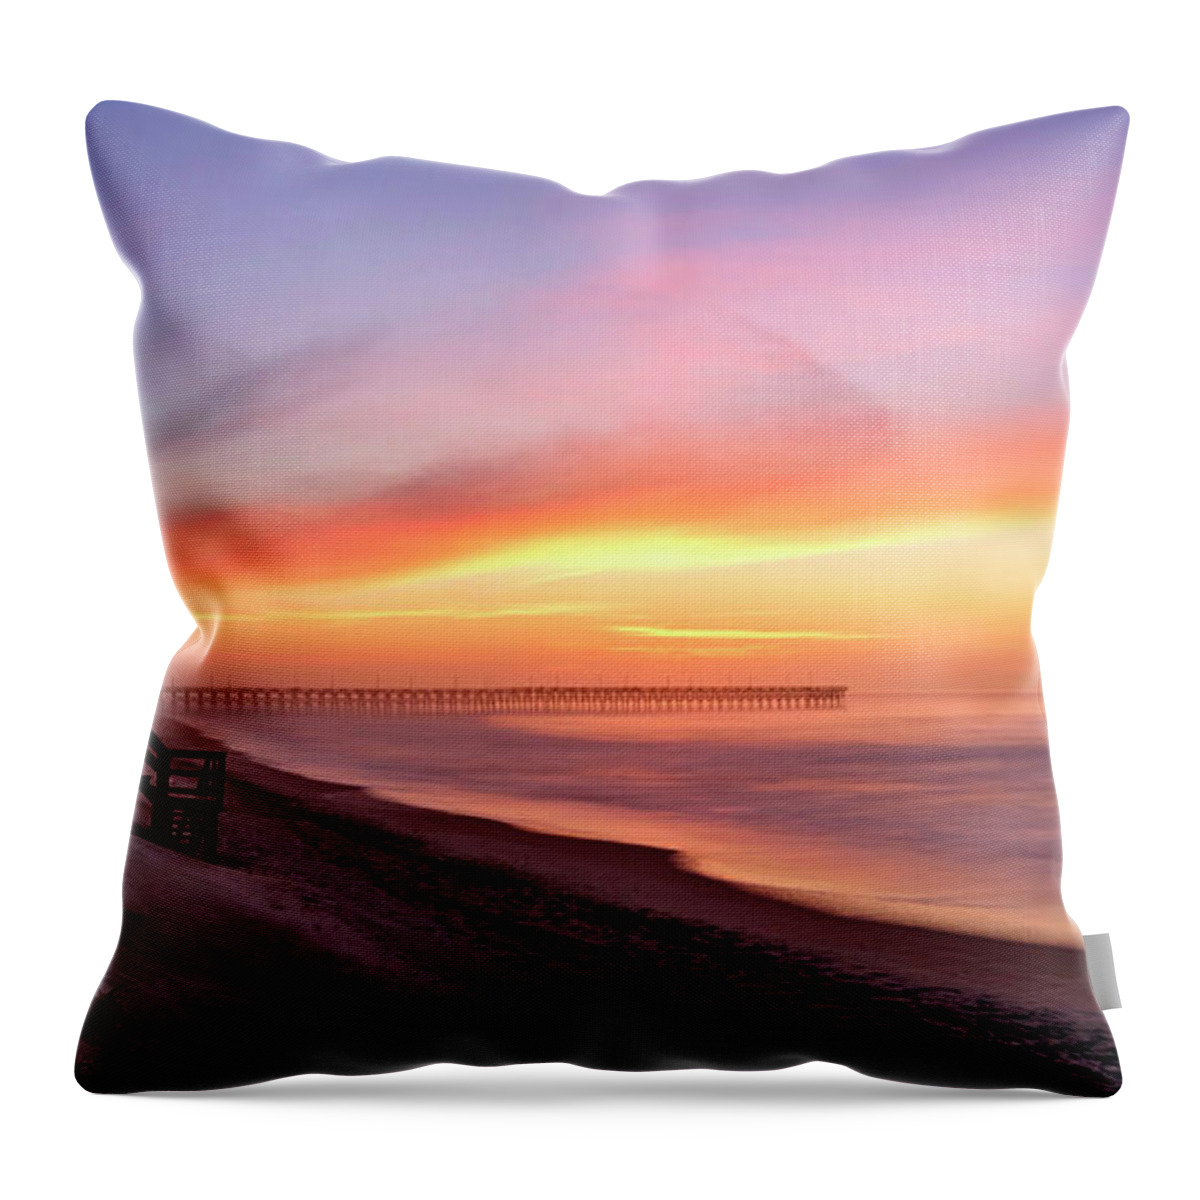 Sunrise Throw Pillow featuring the photograph Pastel Fog by DJA Images